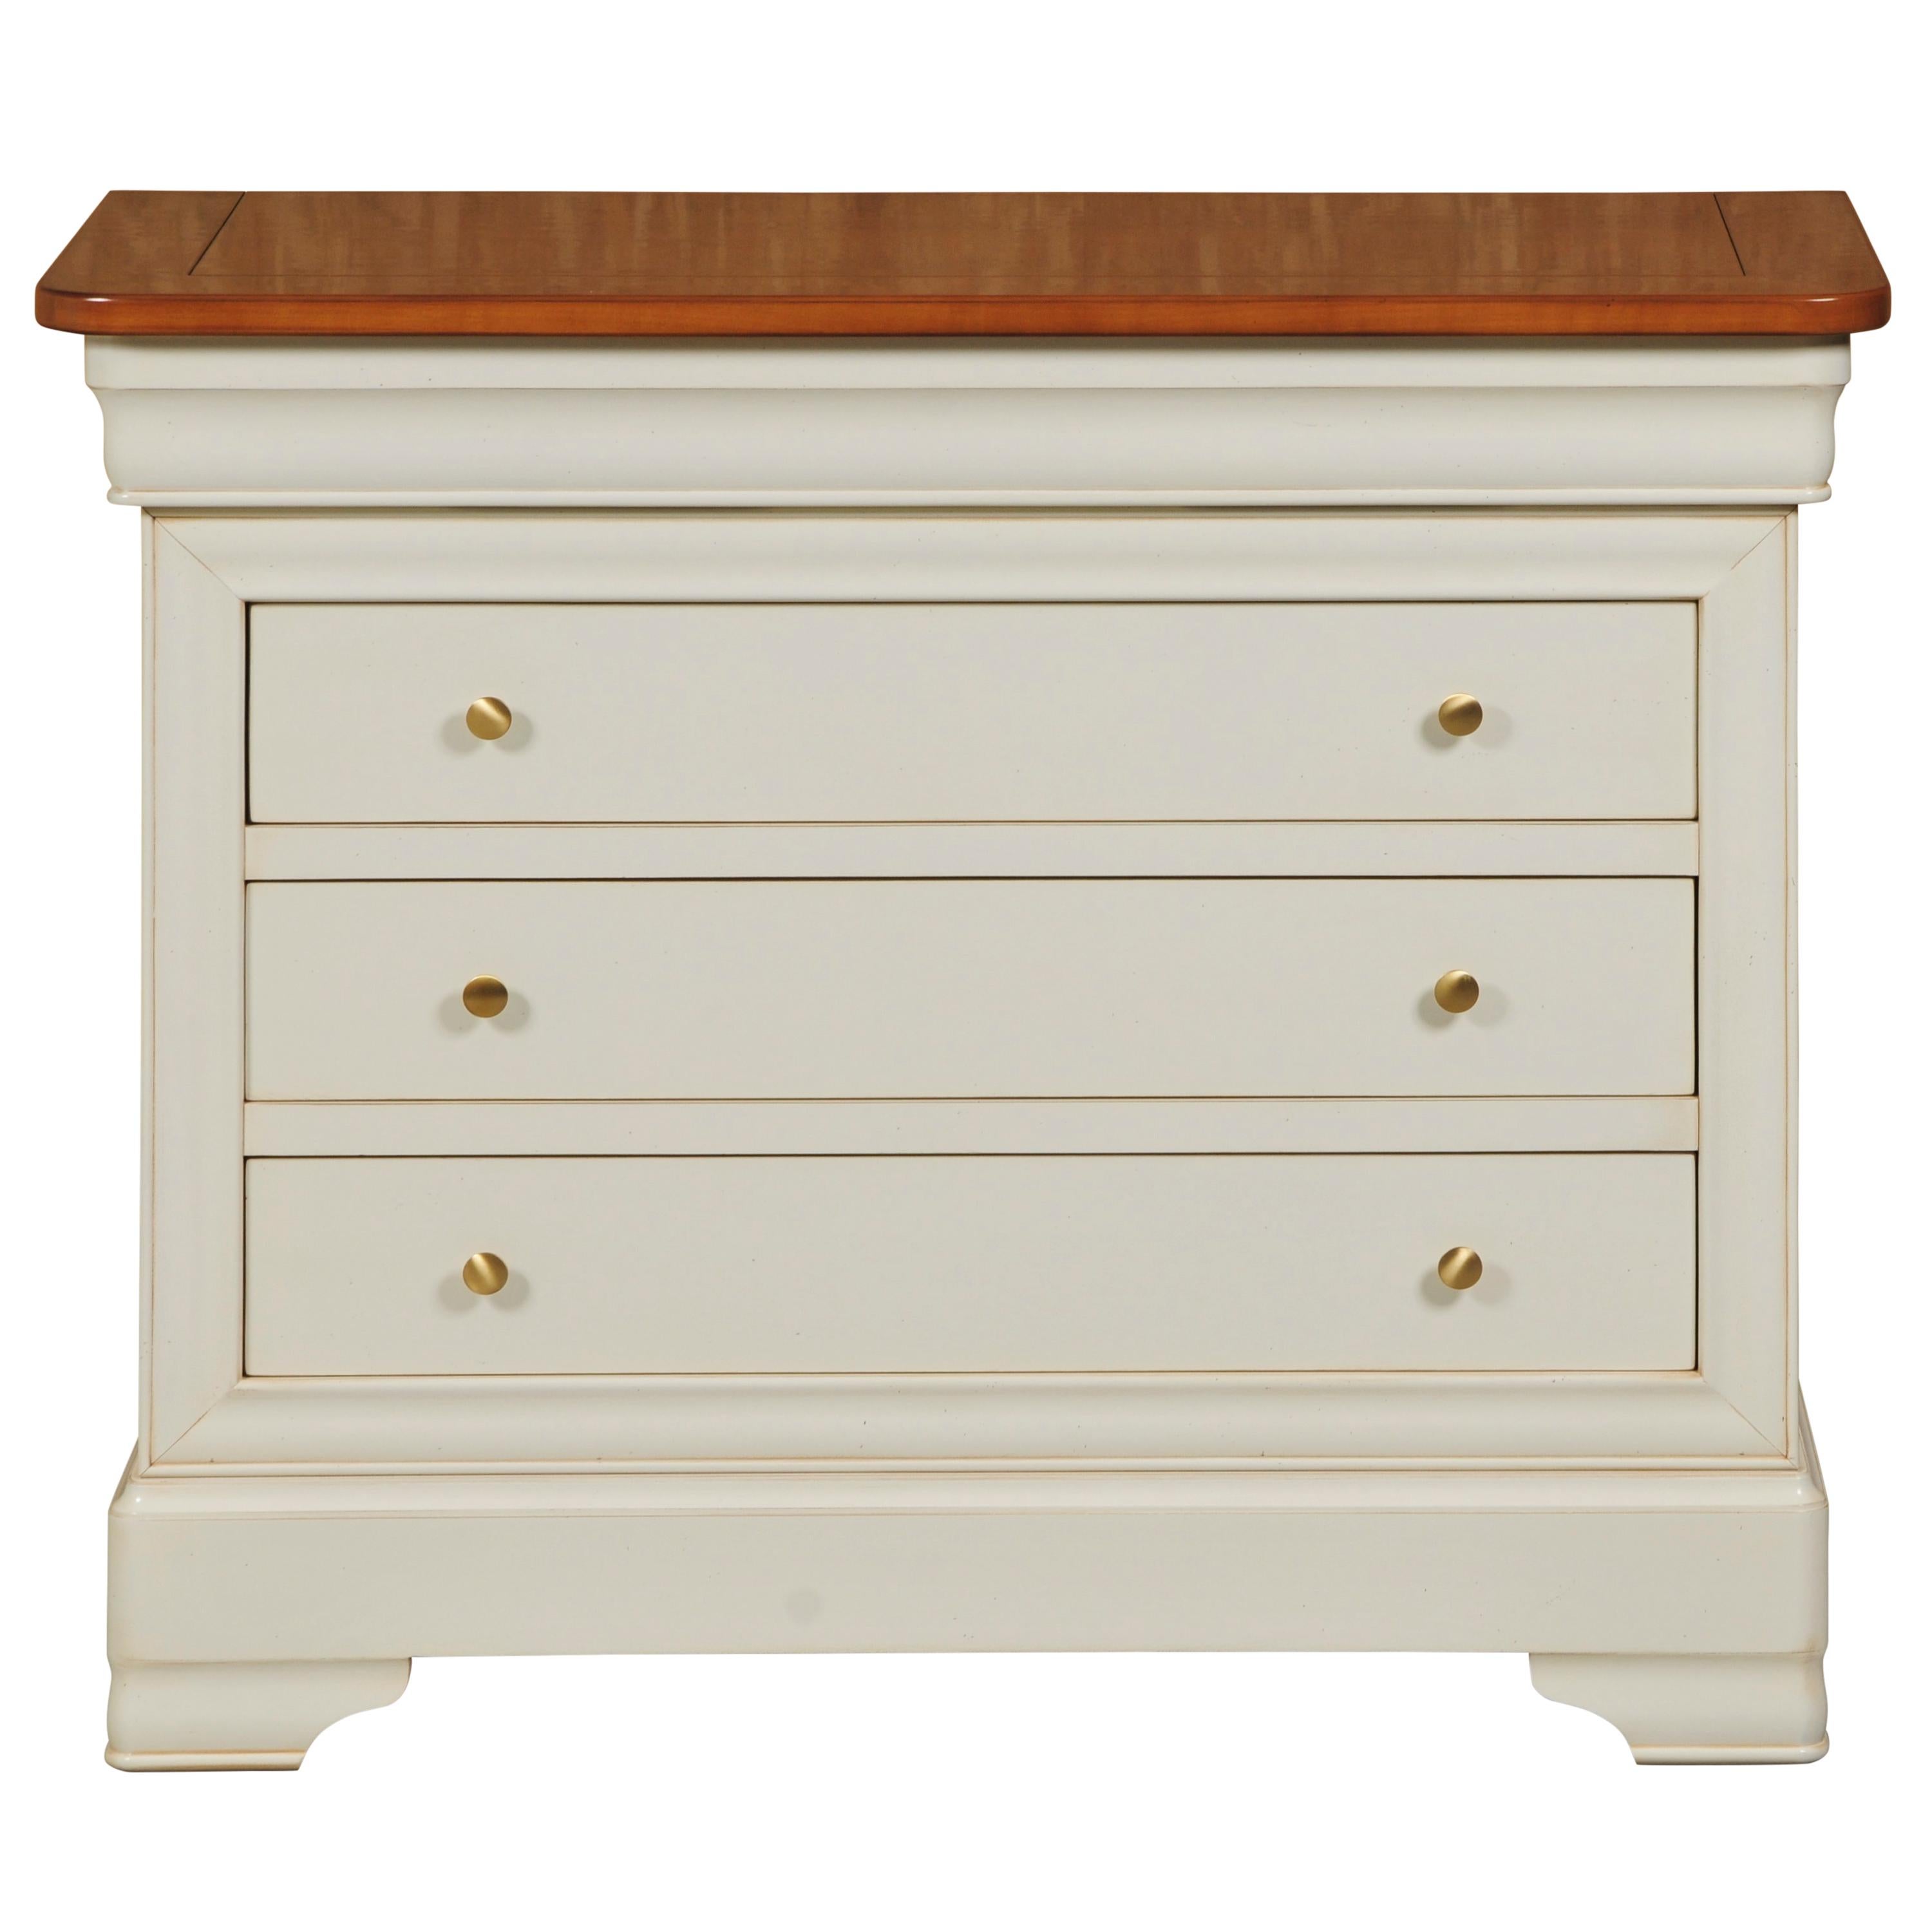 Contemporary Louis Philippe Style Chest of 4 Drawers in Blond Cherry and White-Cream Finish For Sale